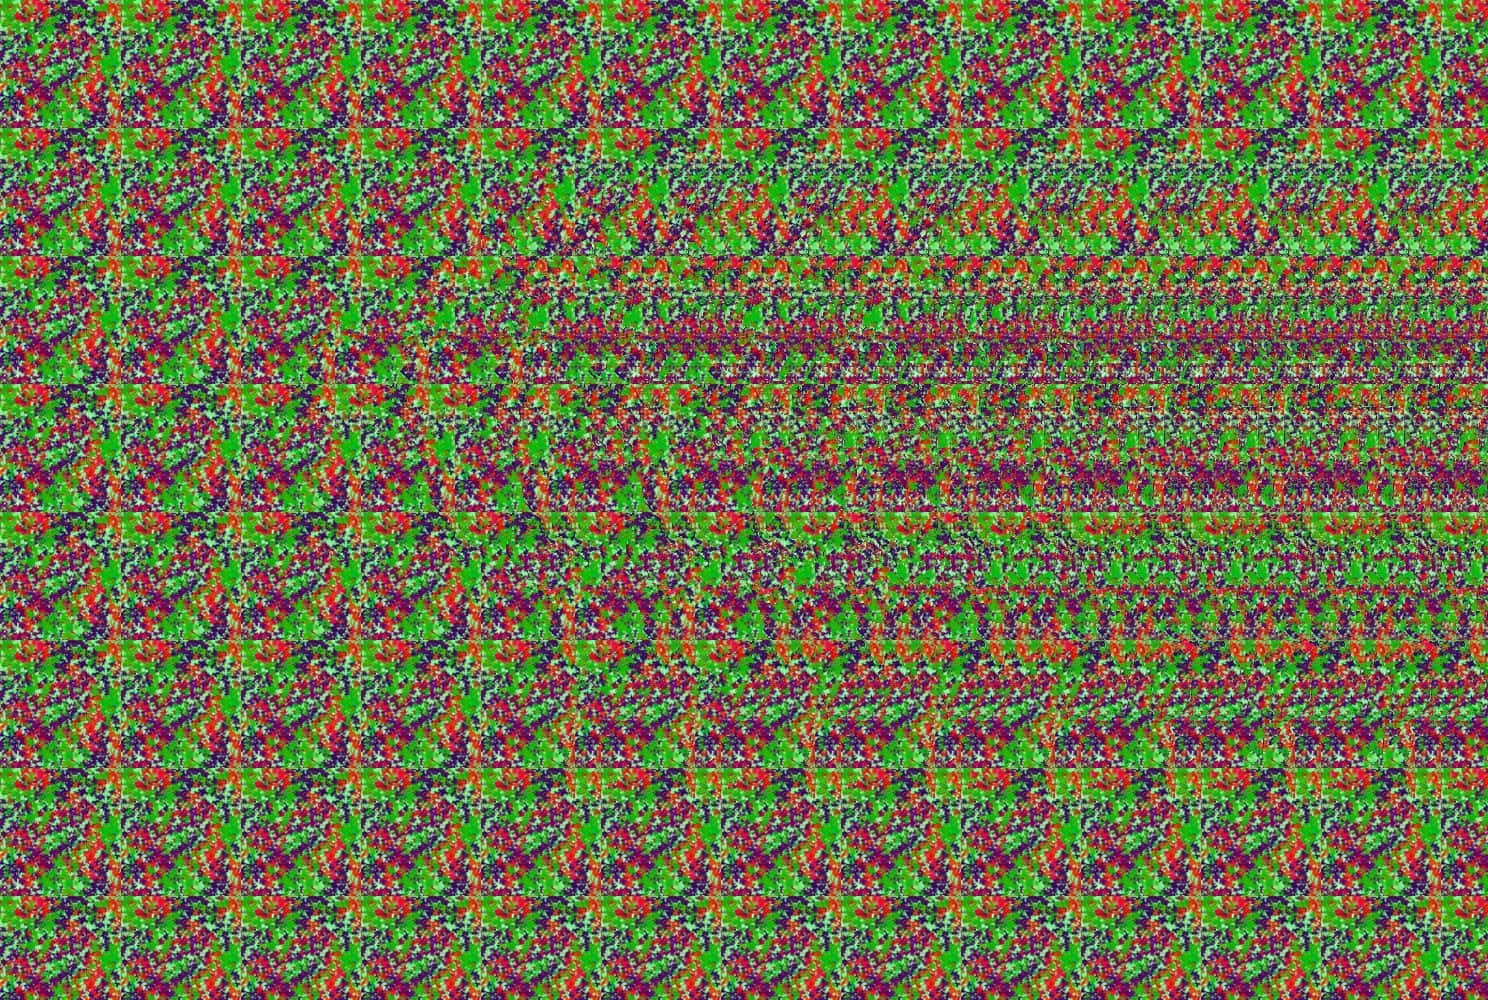 A Colorful Pixelated Pattern With A Green Background